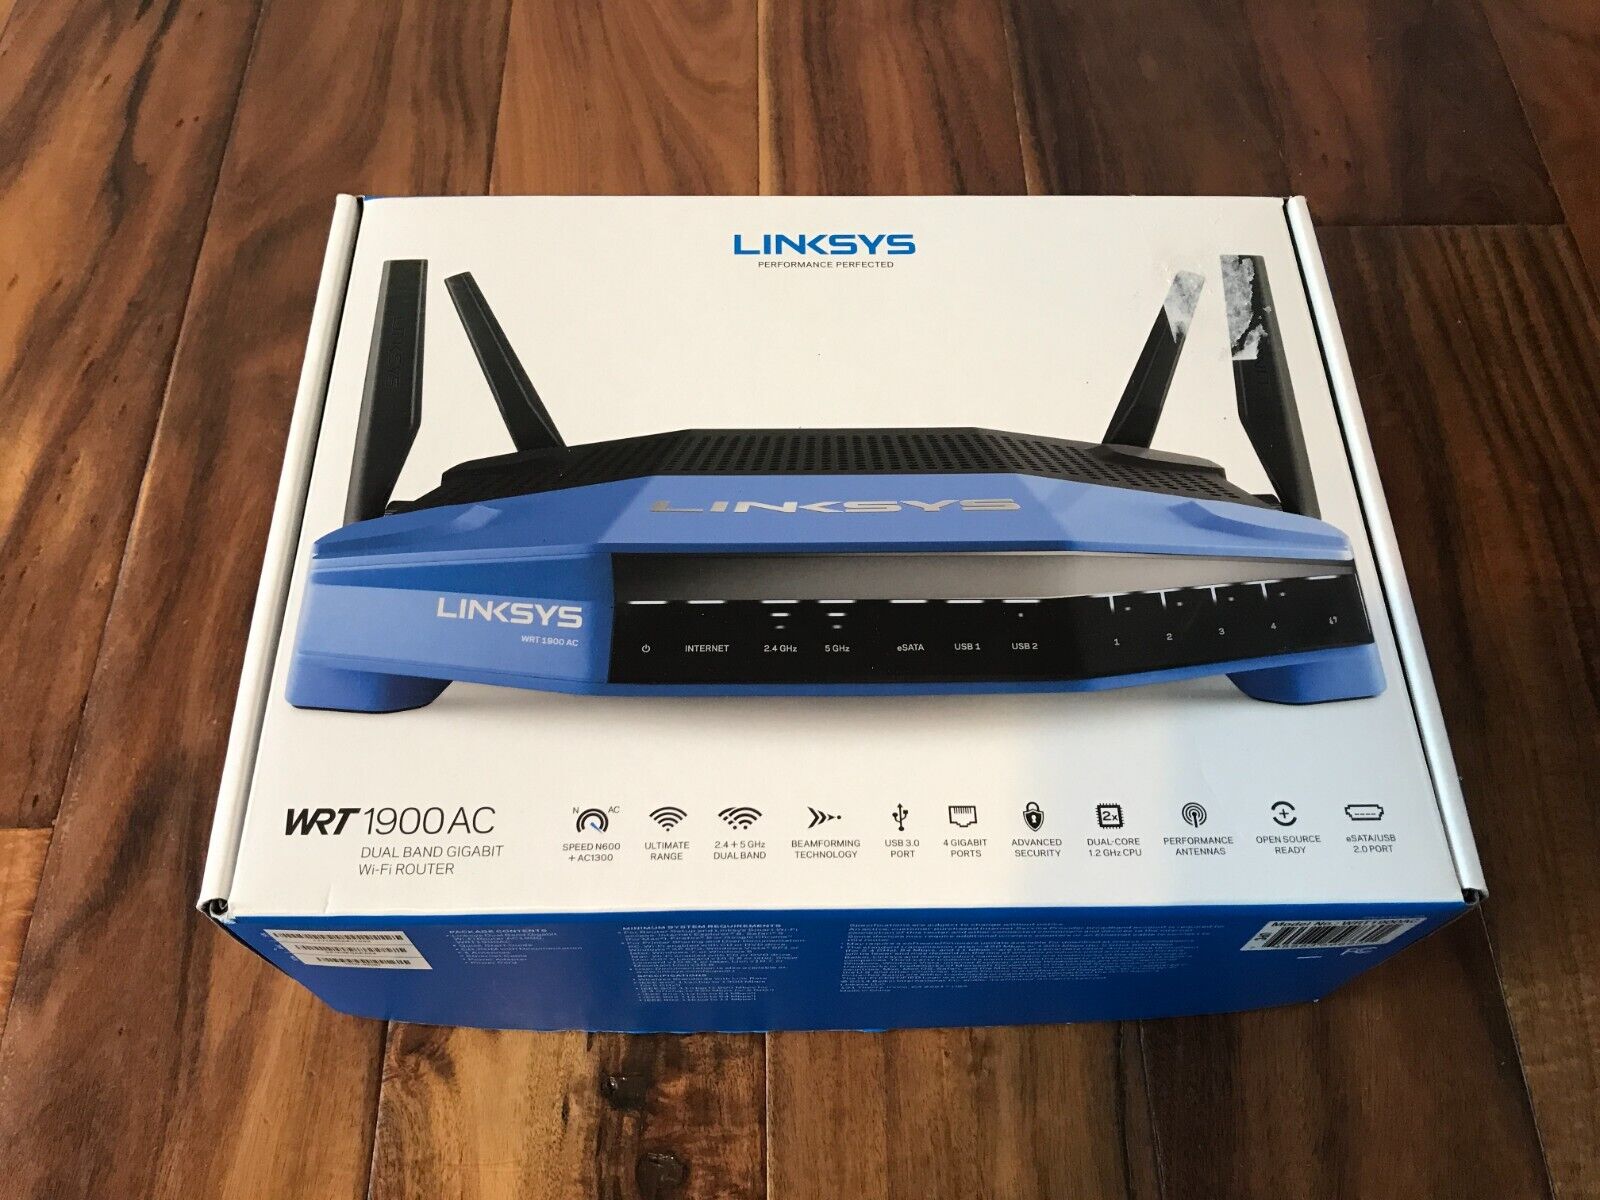 NEW Open BOx Linksys WRT1900AC 1300 Mbps 4 Port Dual-Band Gigabit Wi-Fi Router